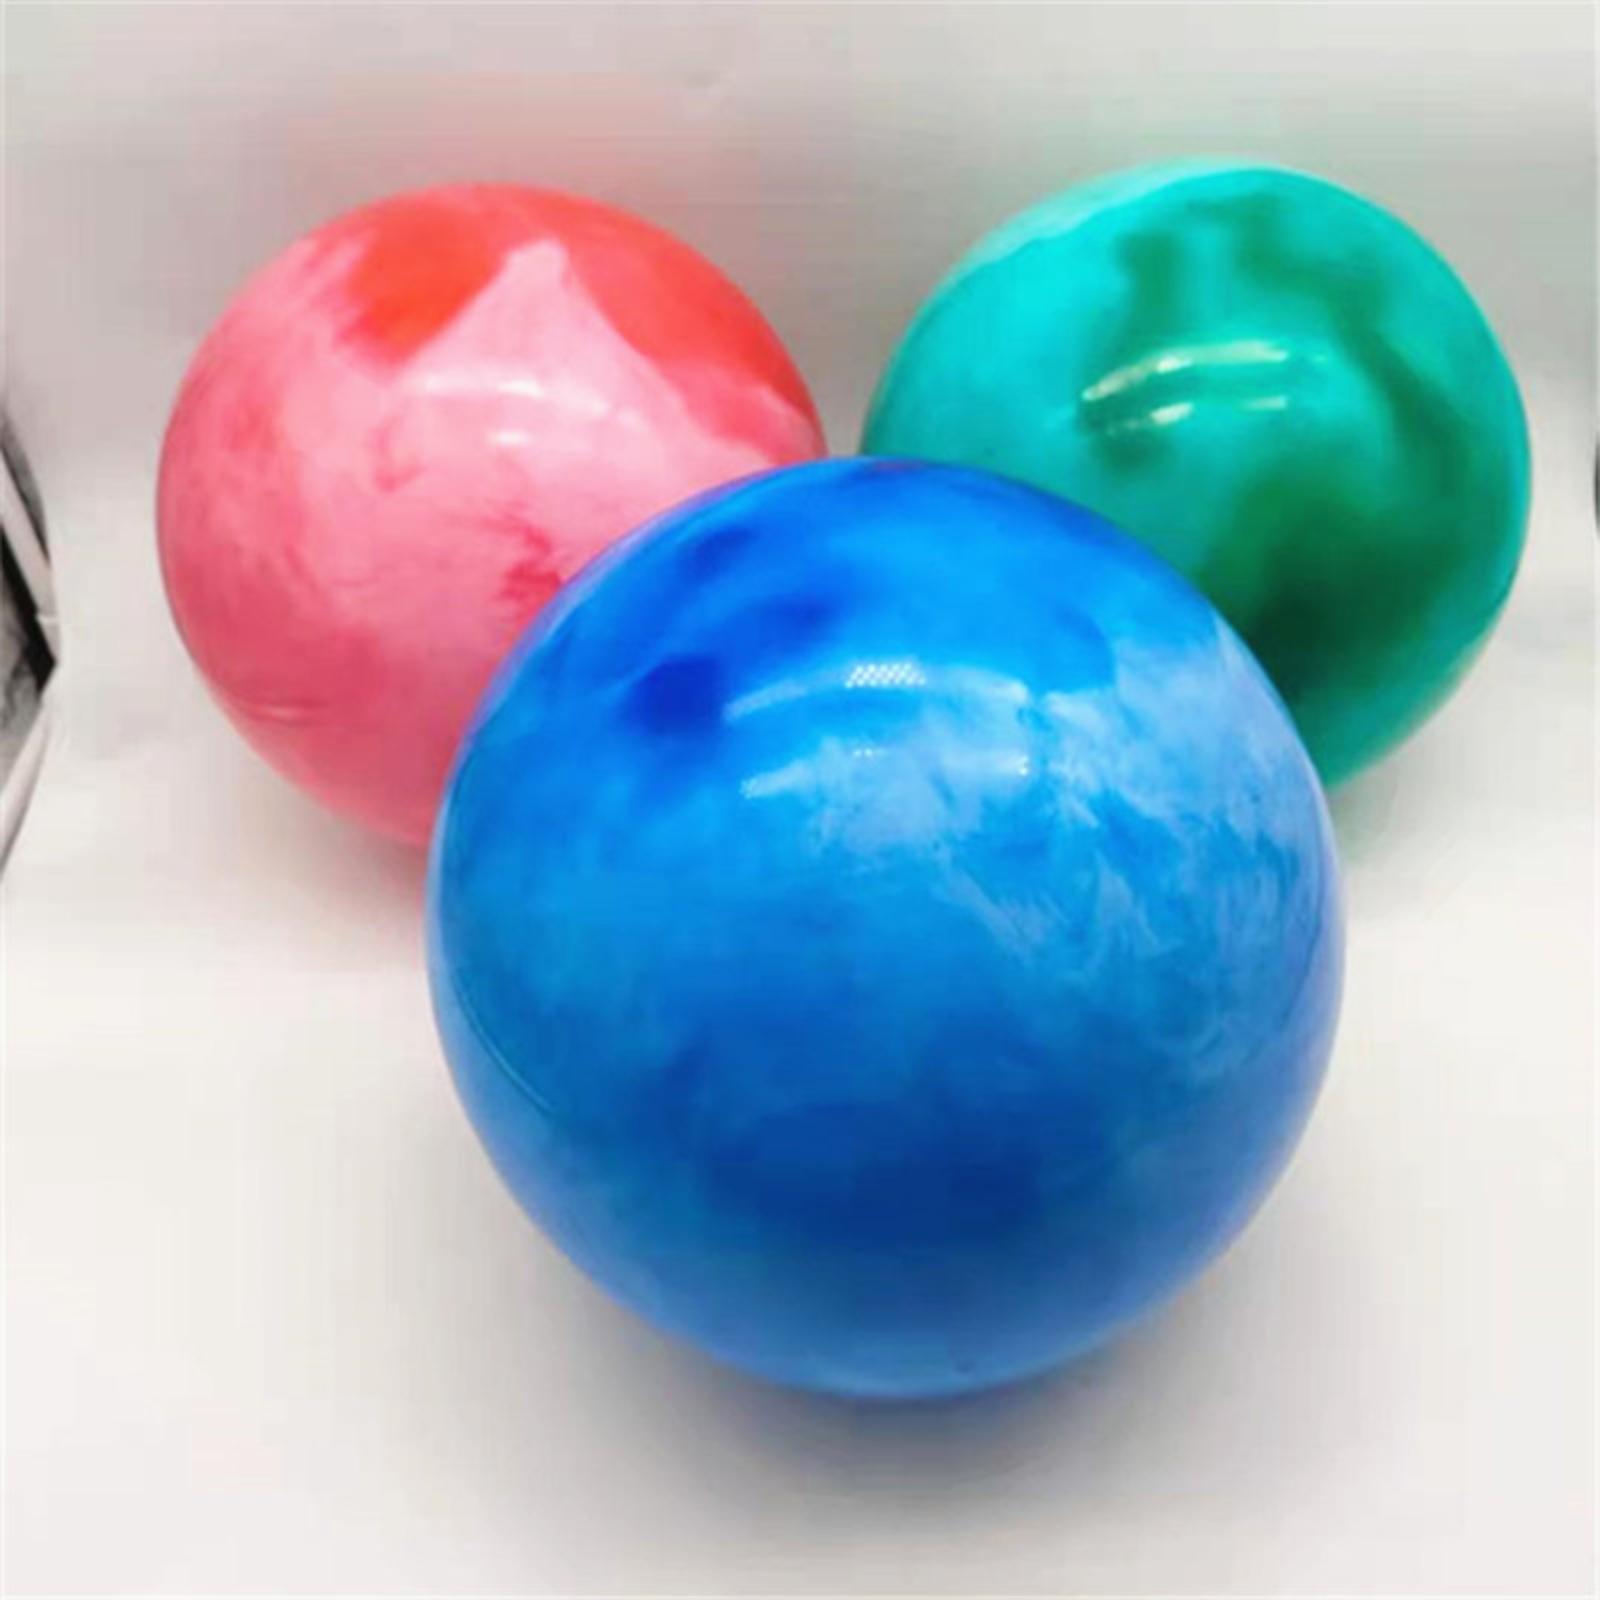 Pilates Ball Yoga Ball Workout Strengthening Trainer Mini Barre Ball Exercise Balls for Stability Training Barre Stretching Balance Practice